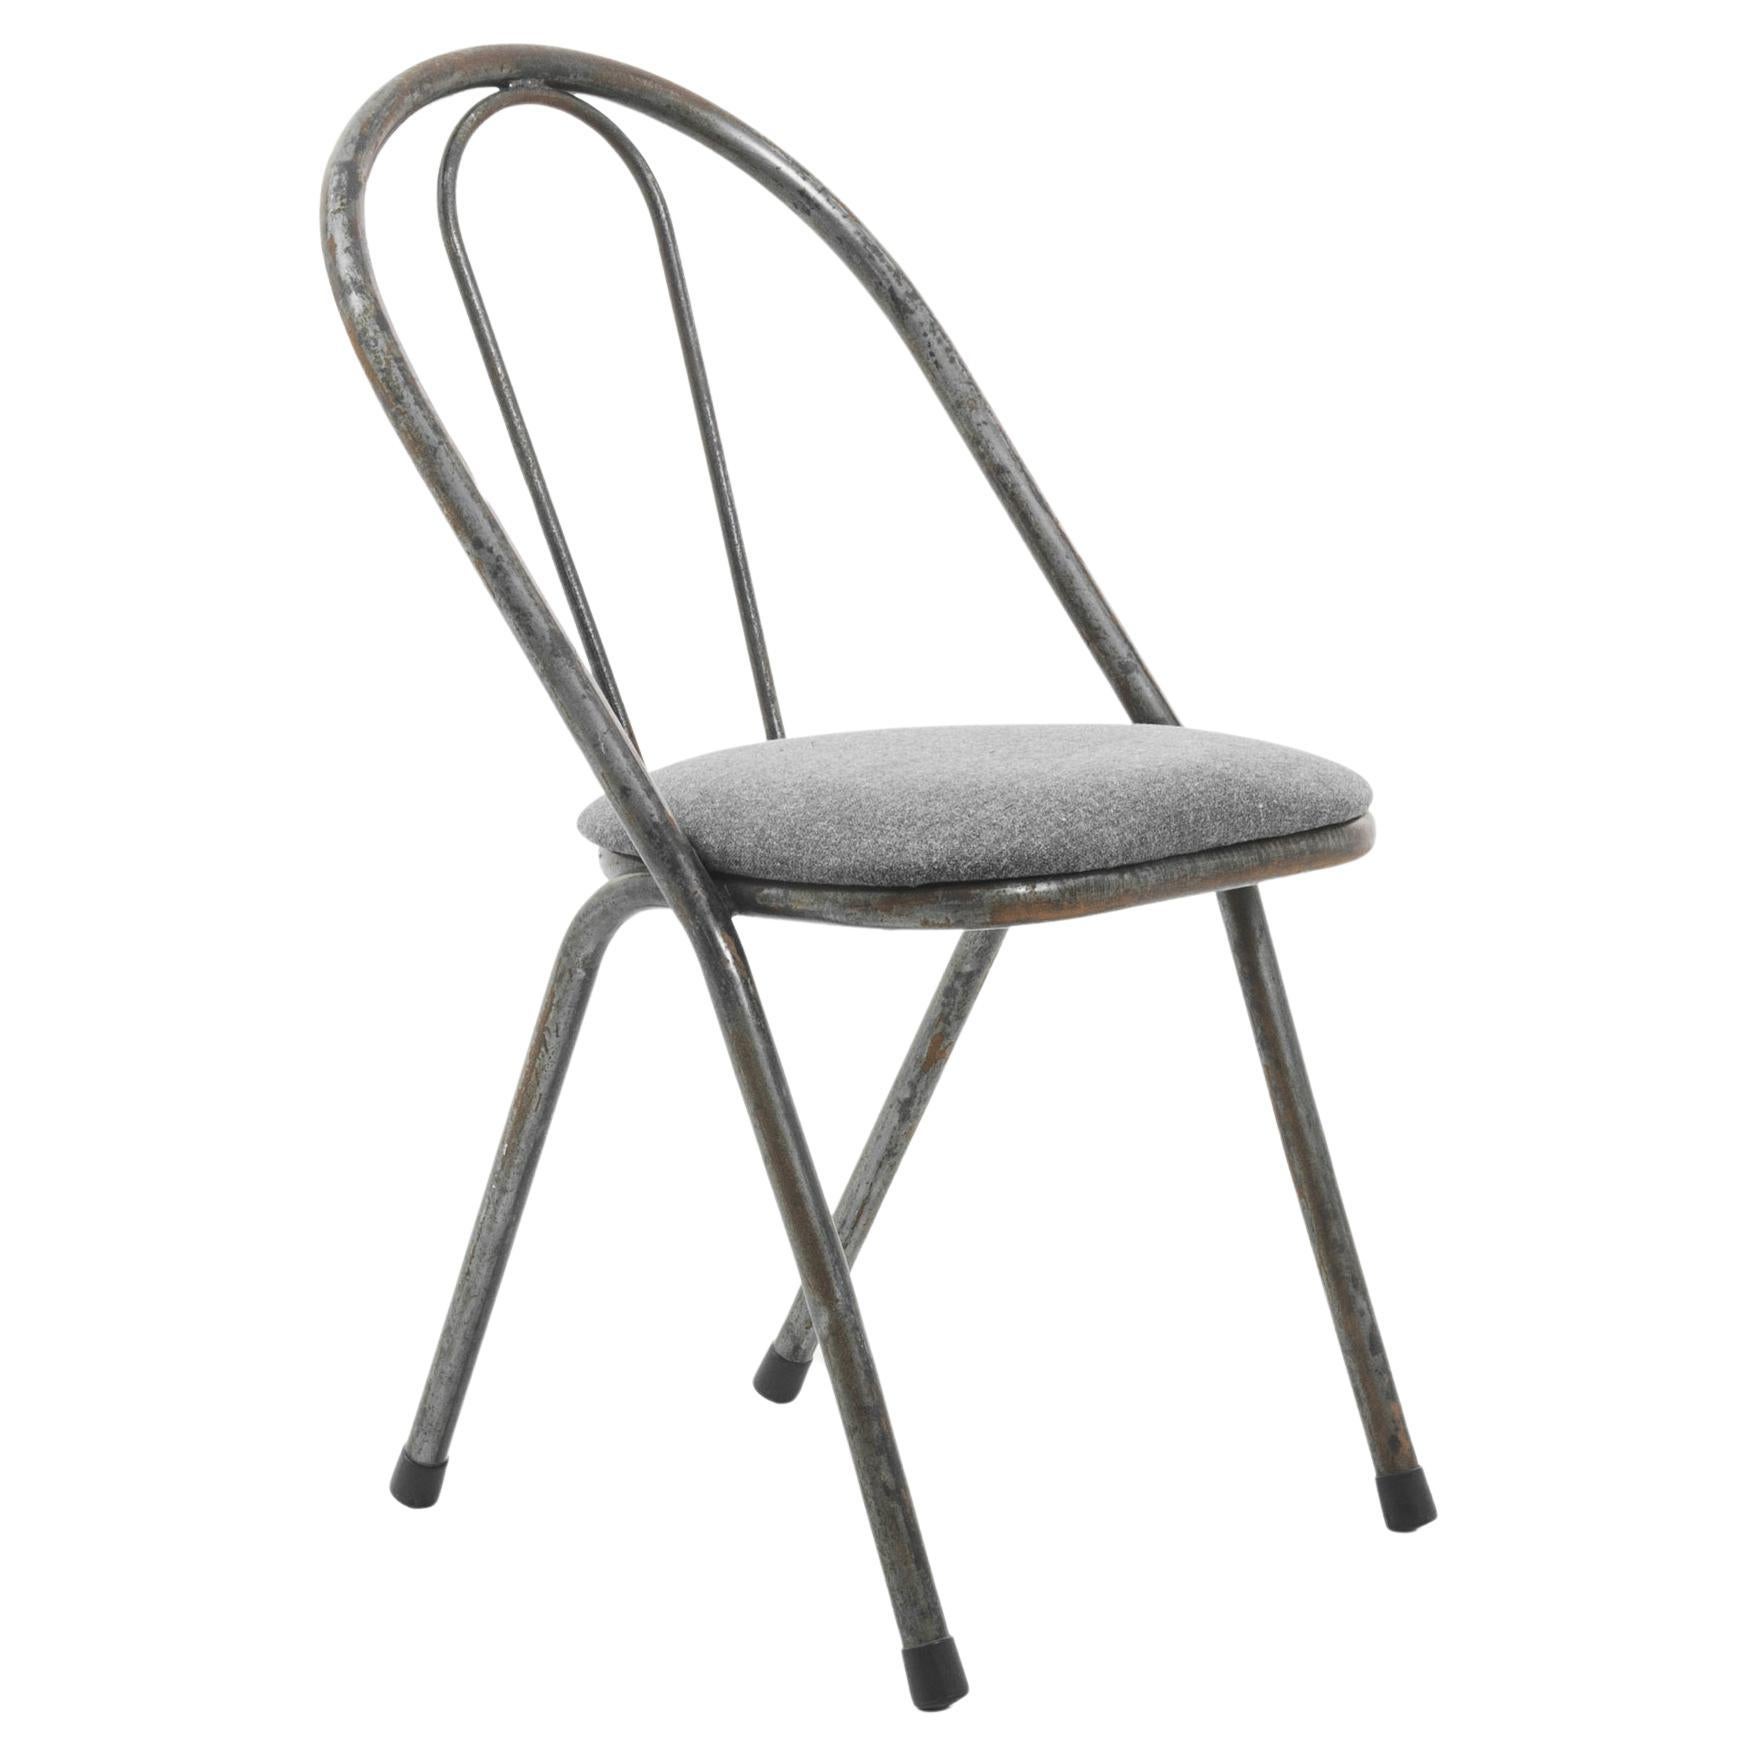 1950s British Metal Chair For Sale